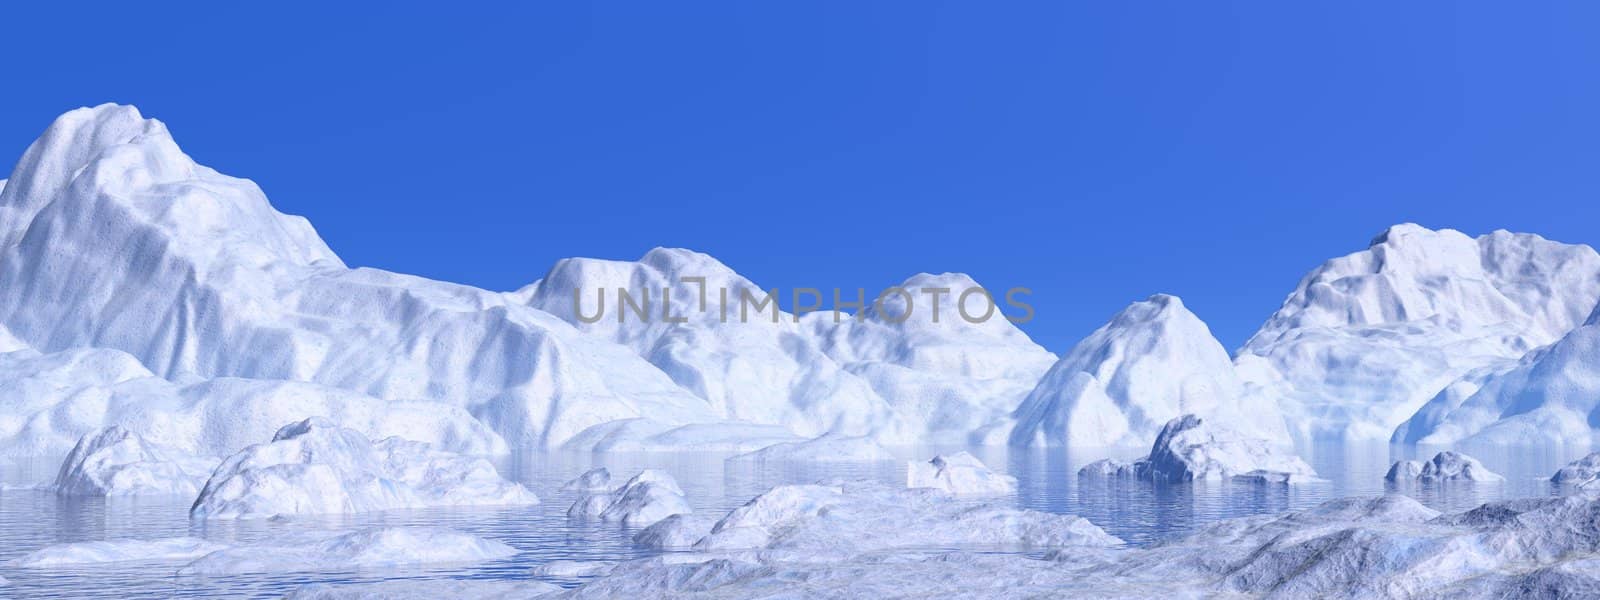 Landscape of northen nature with white icebergs melting in water by beautiful weather